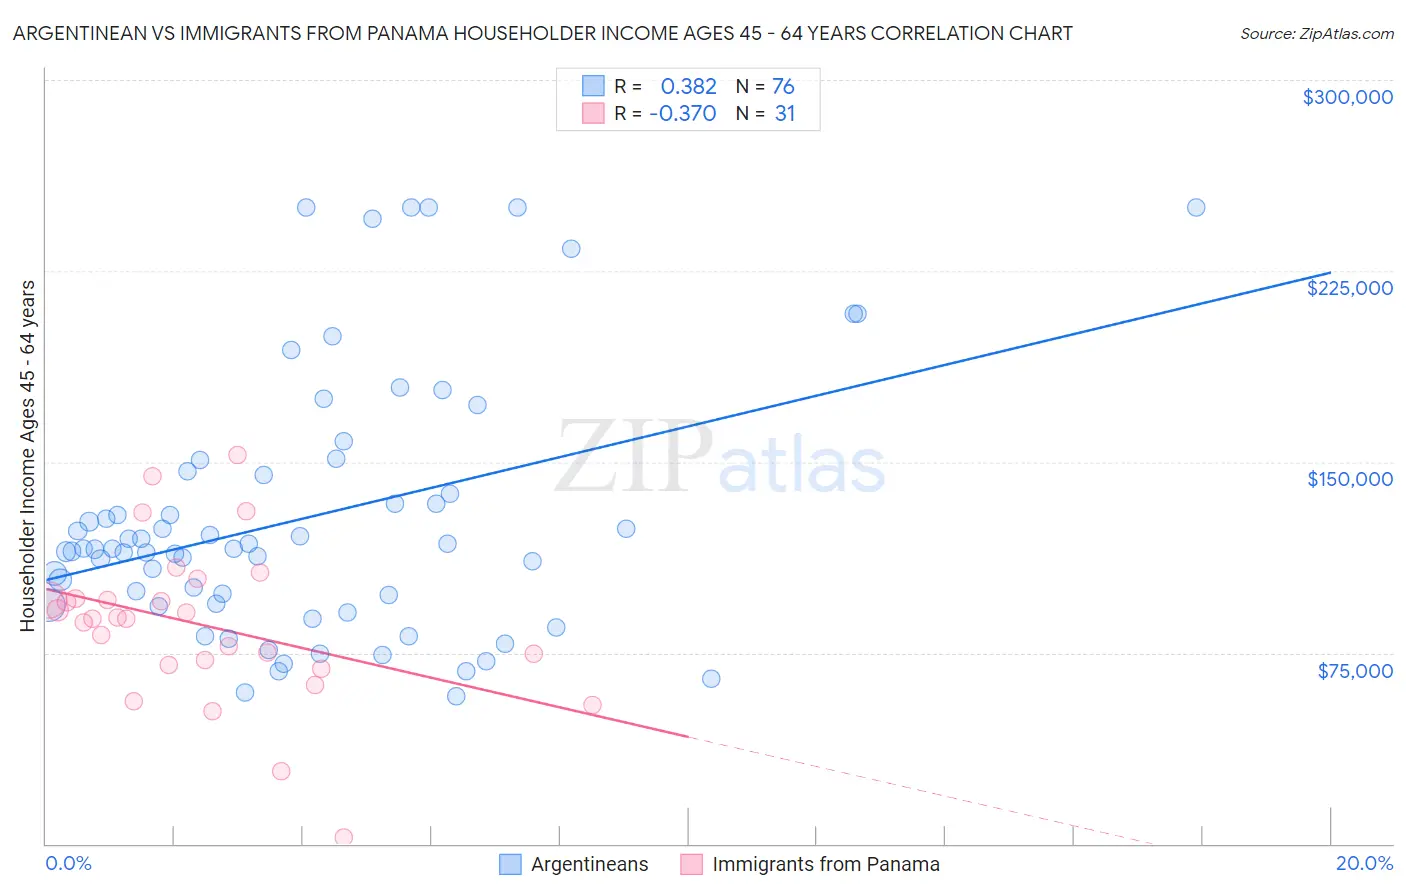 Argentinean vs Immigrants from Panama Householder Income Ages 45 - 64 years